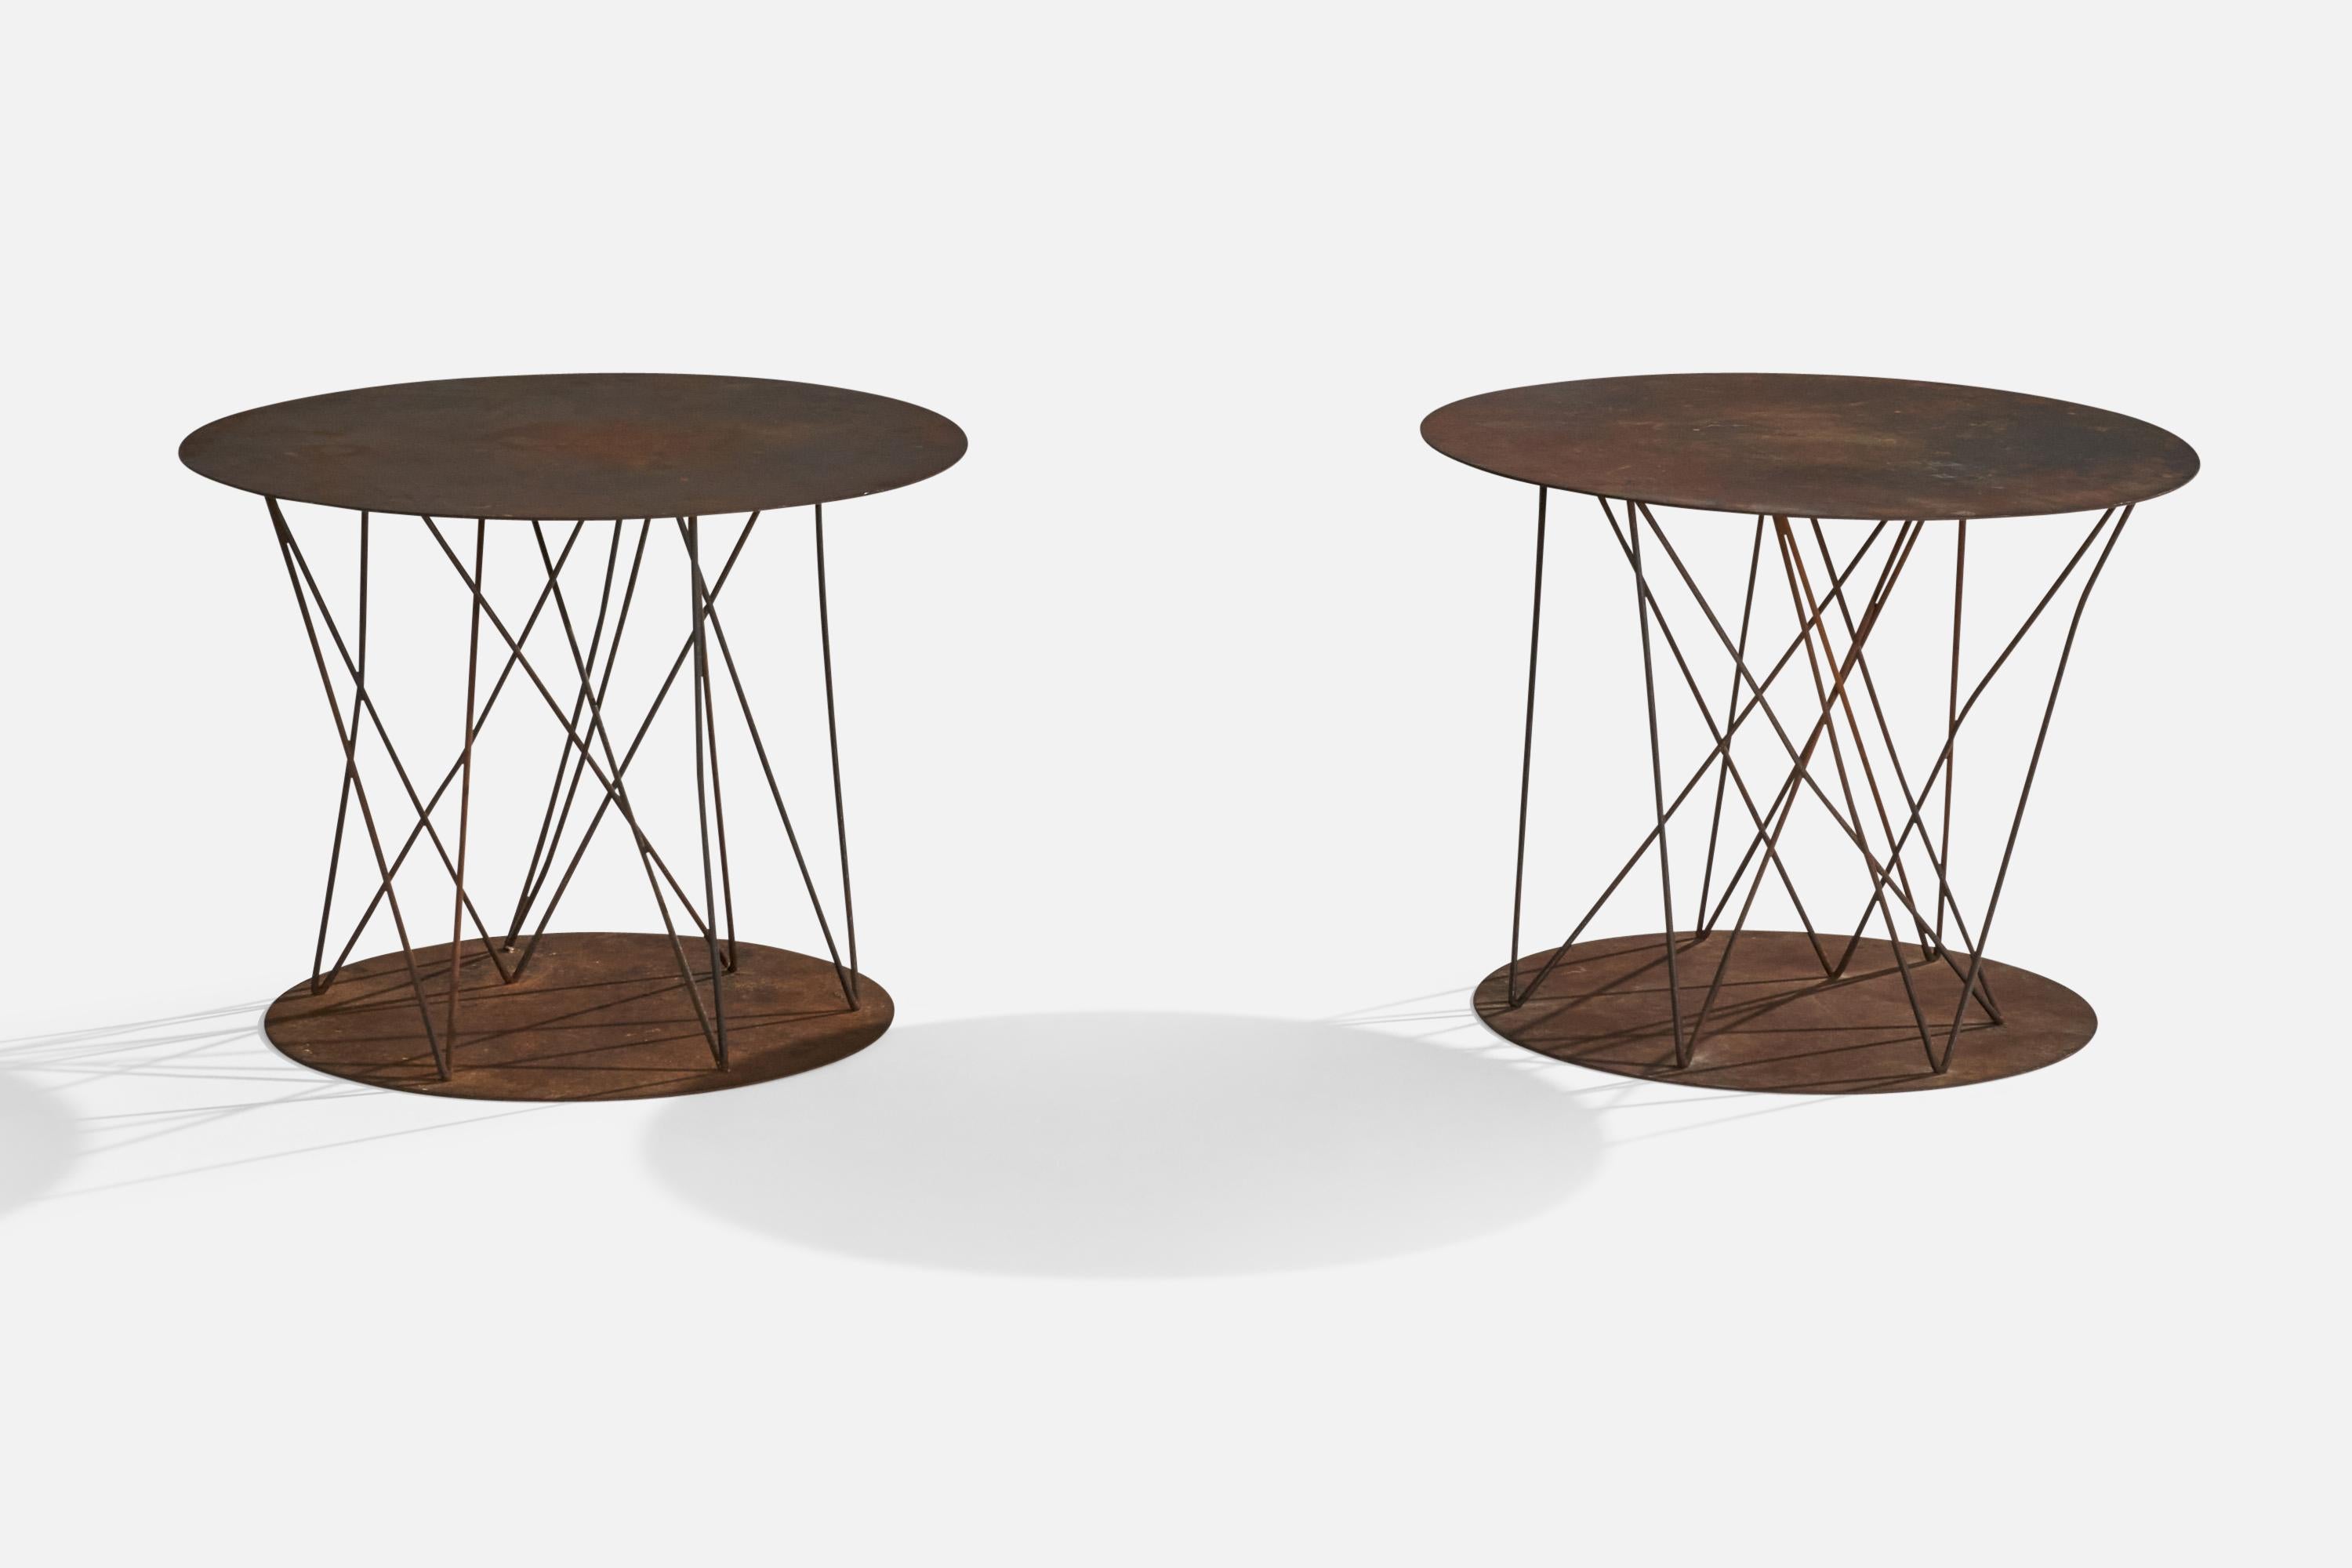 A pair of metal side tables designed and produced in the US, 1970s.
